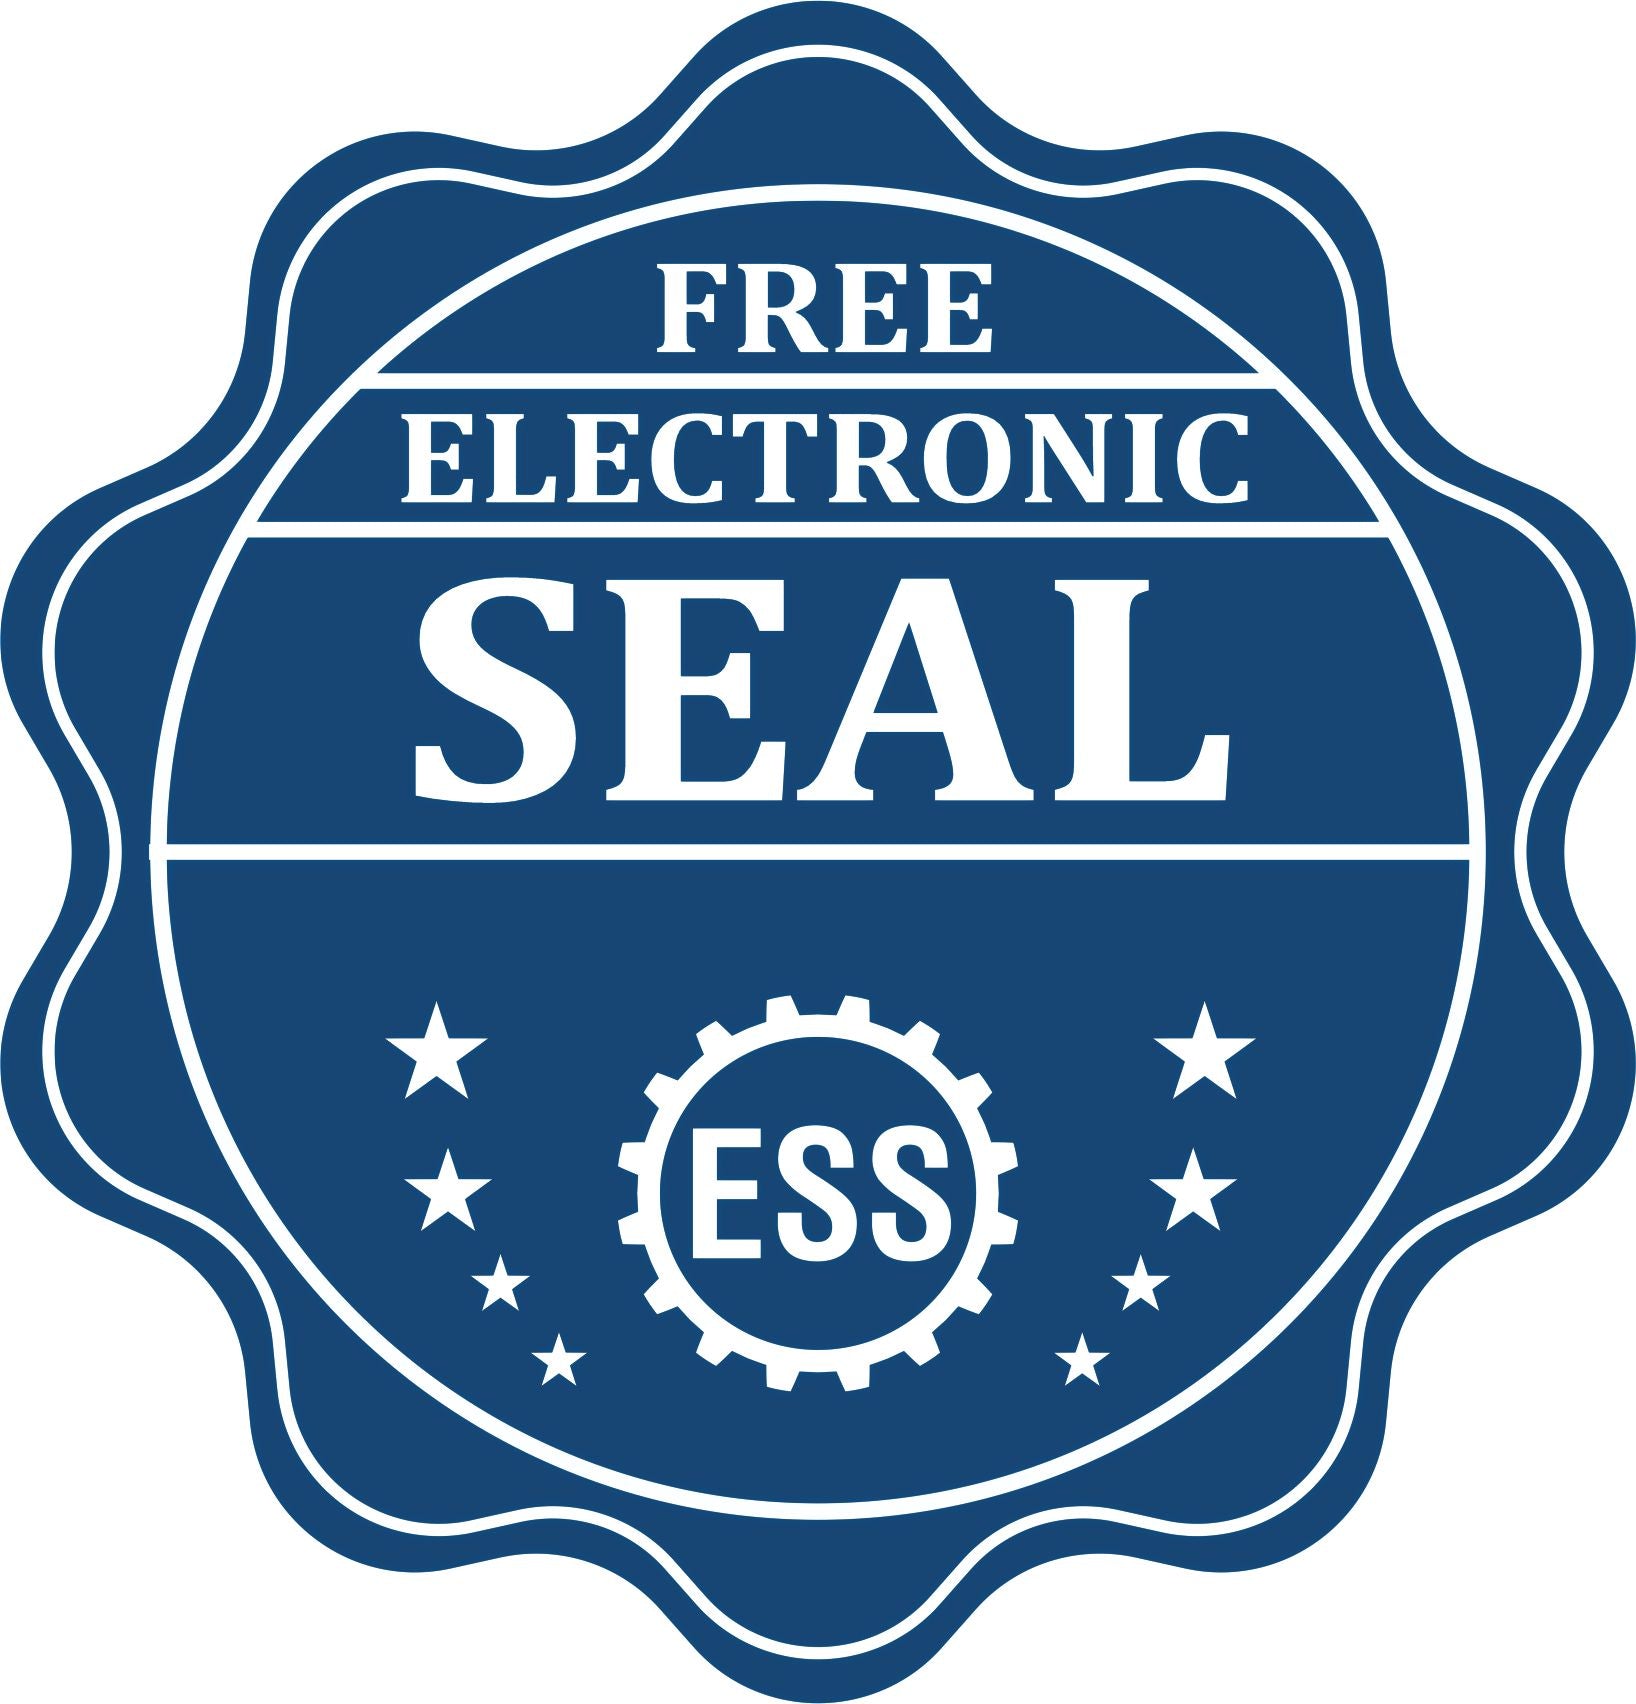 A badge showing a free electronic seal for the Slim Pre-Inked Utah Land Surveyor Seal Stamp with stars and the ESS gear on the emblem.